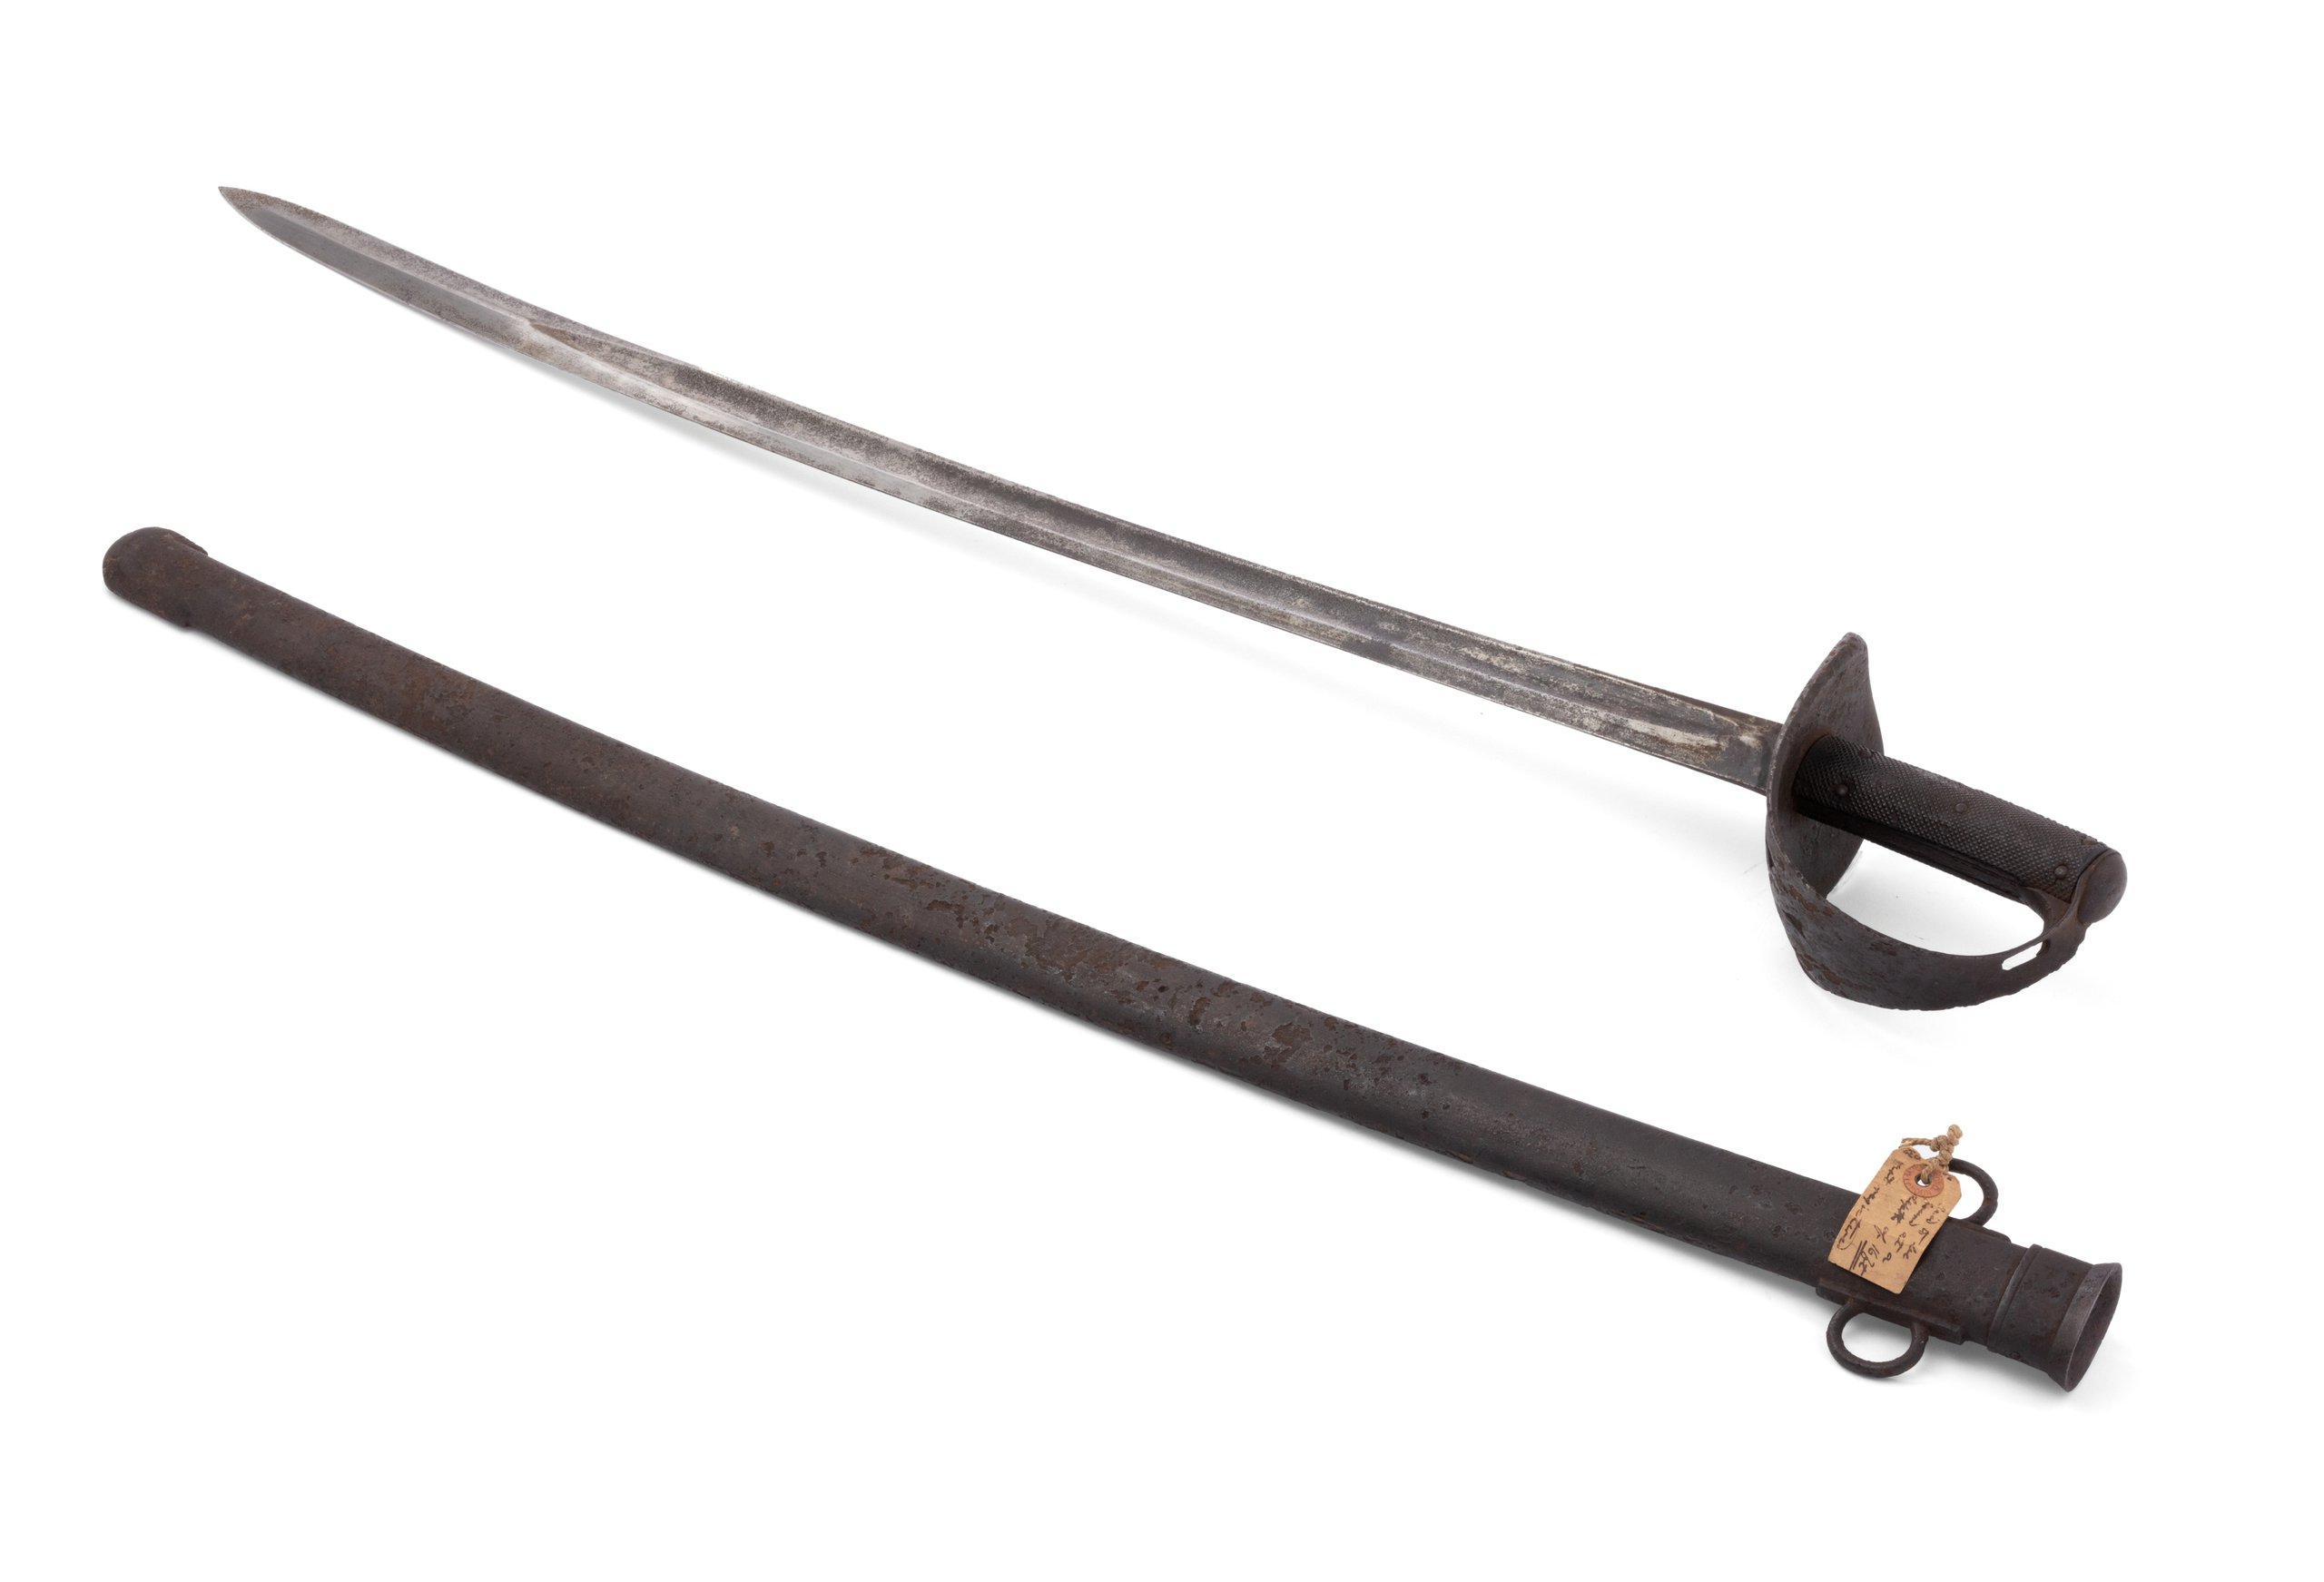 Sword and scabbard made by Wilkinson Sword Company